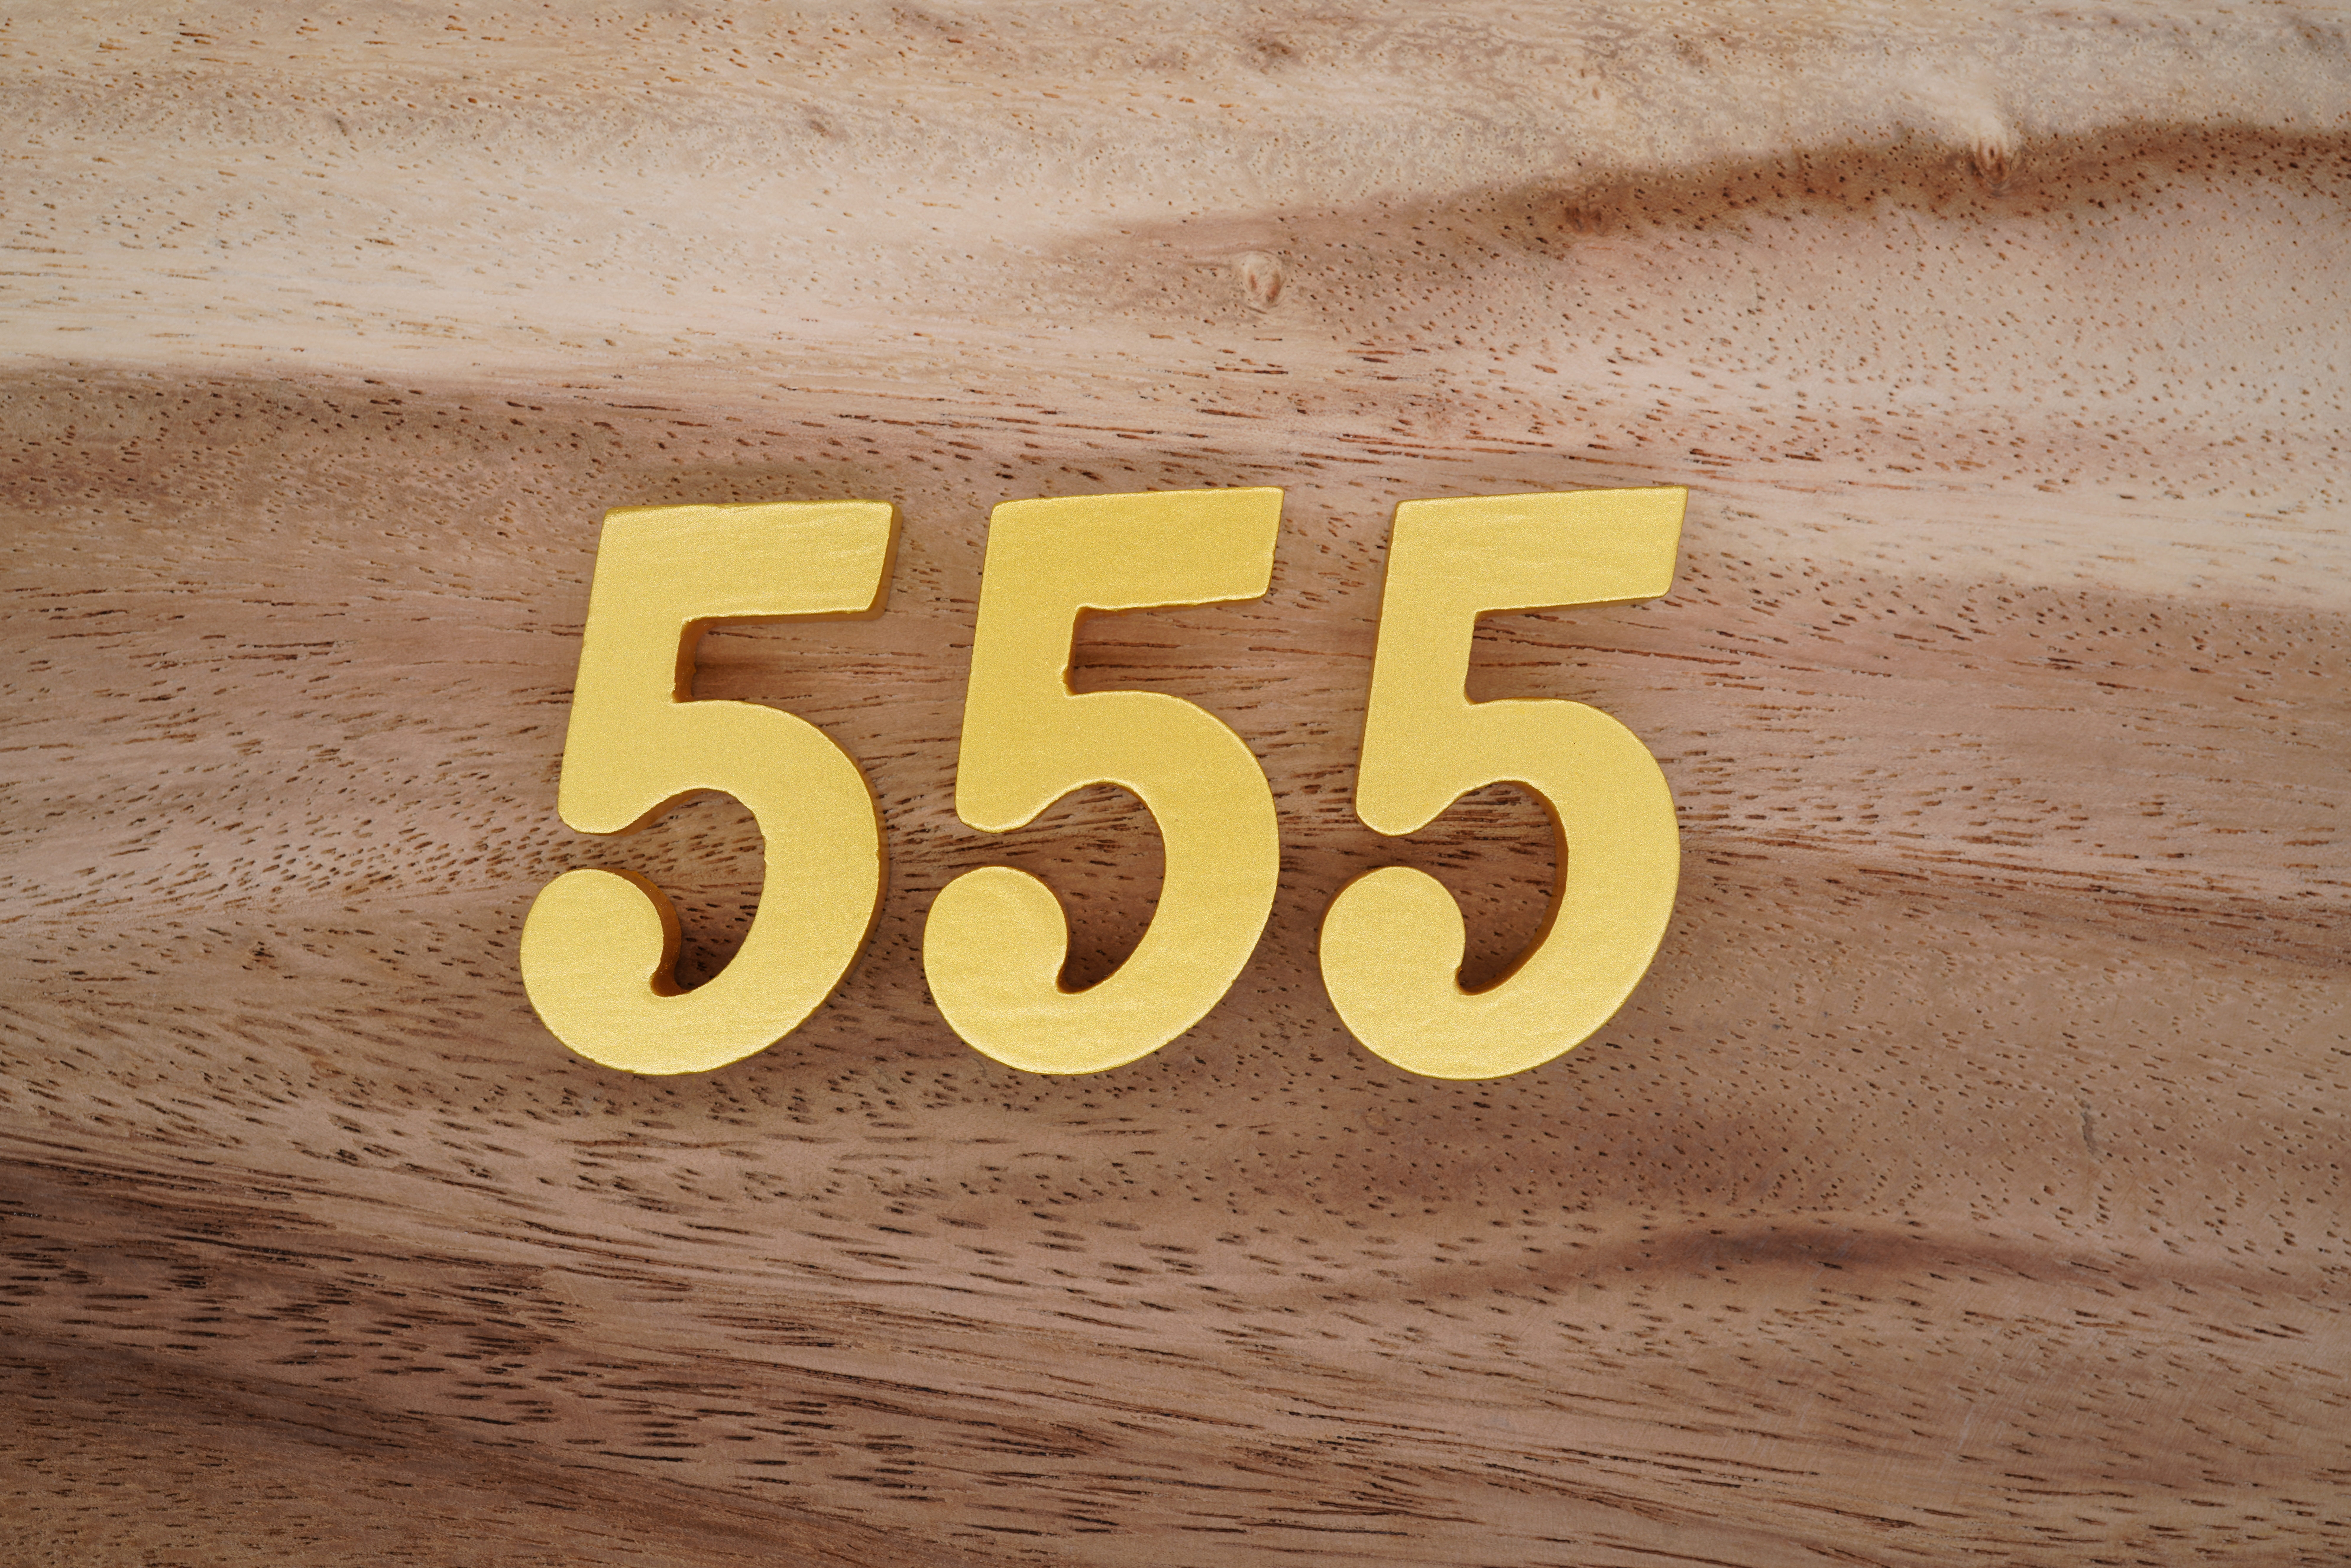 Three gold 5's written on a wooden background